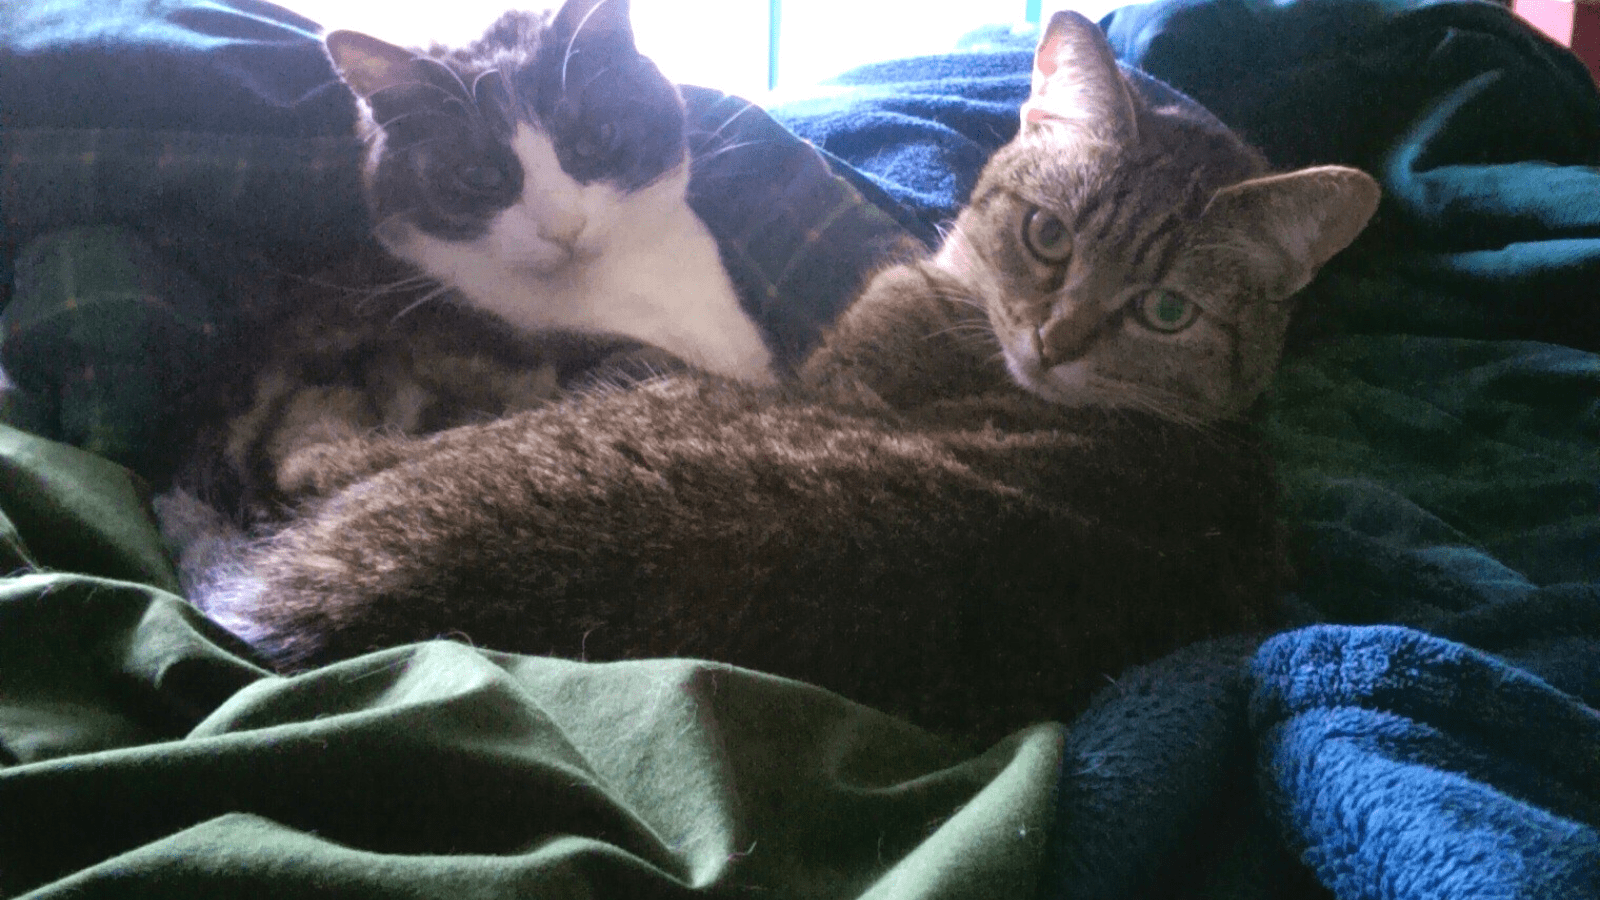 Cats Smoggie and Tabbytha cuddle together on some bedsheets.